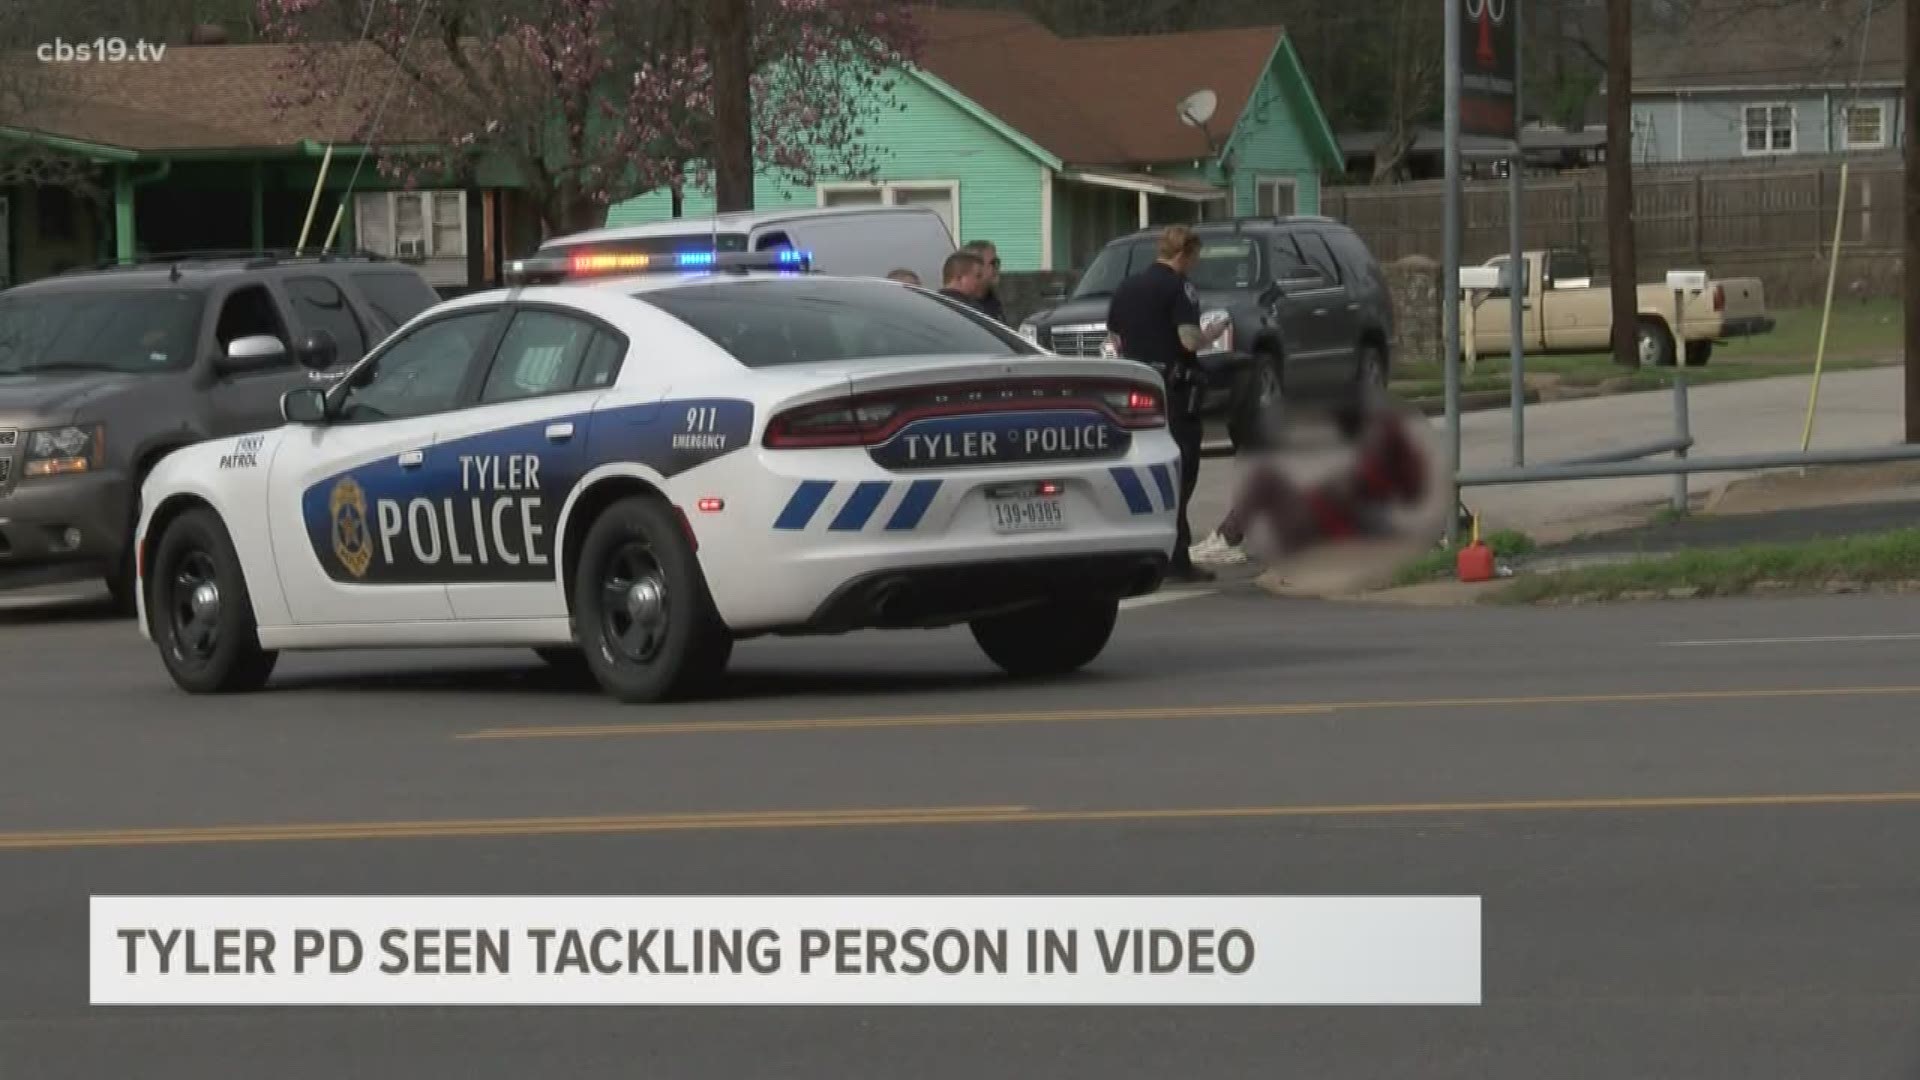 Last week a video was posted to Facebook of Tyler police officers appearing to use violent force to arrest a subject.